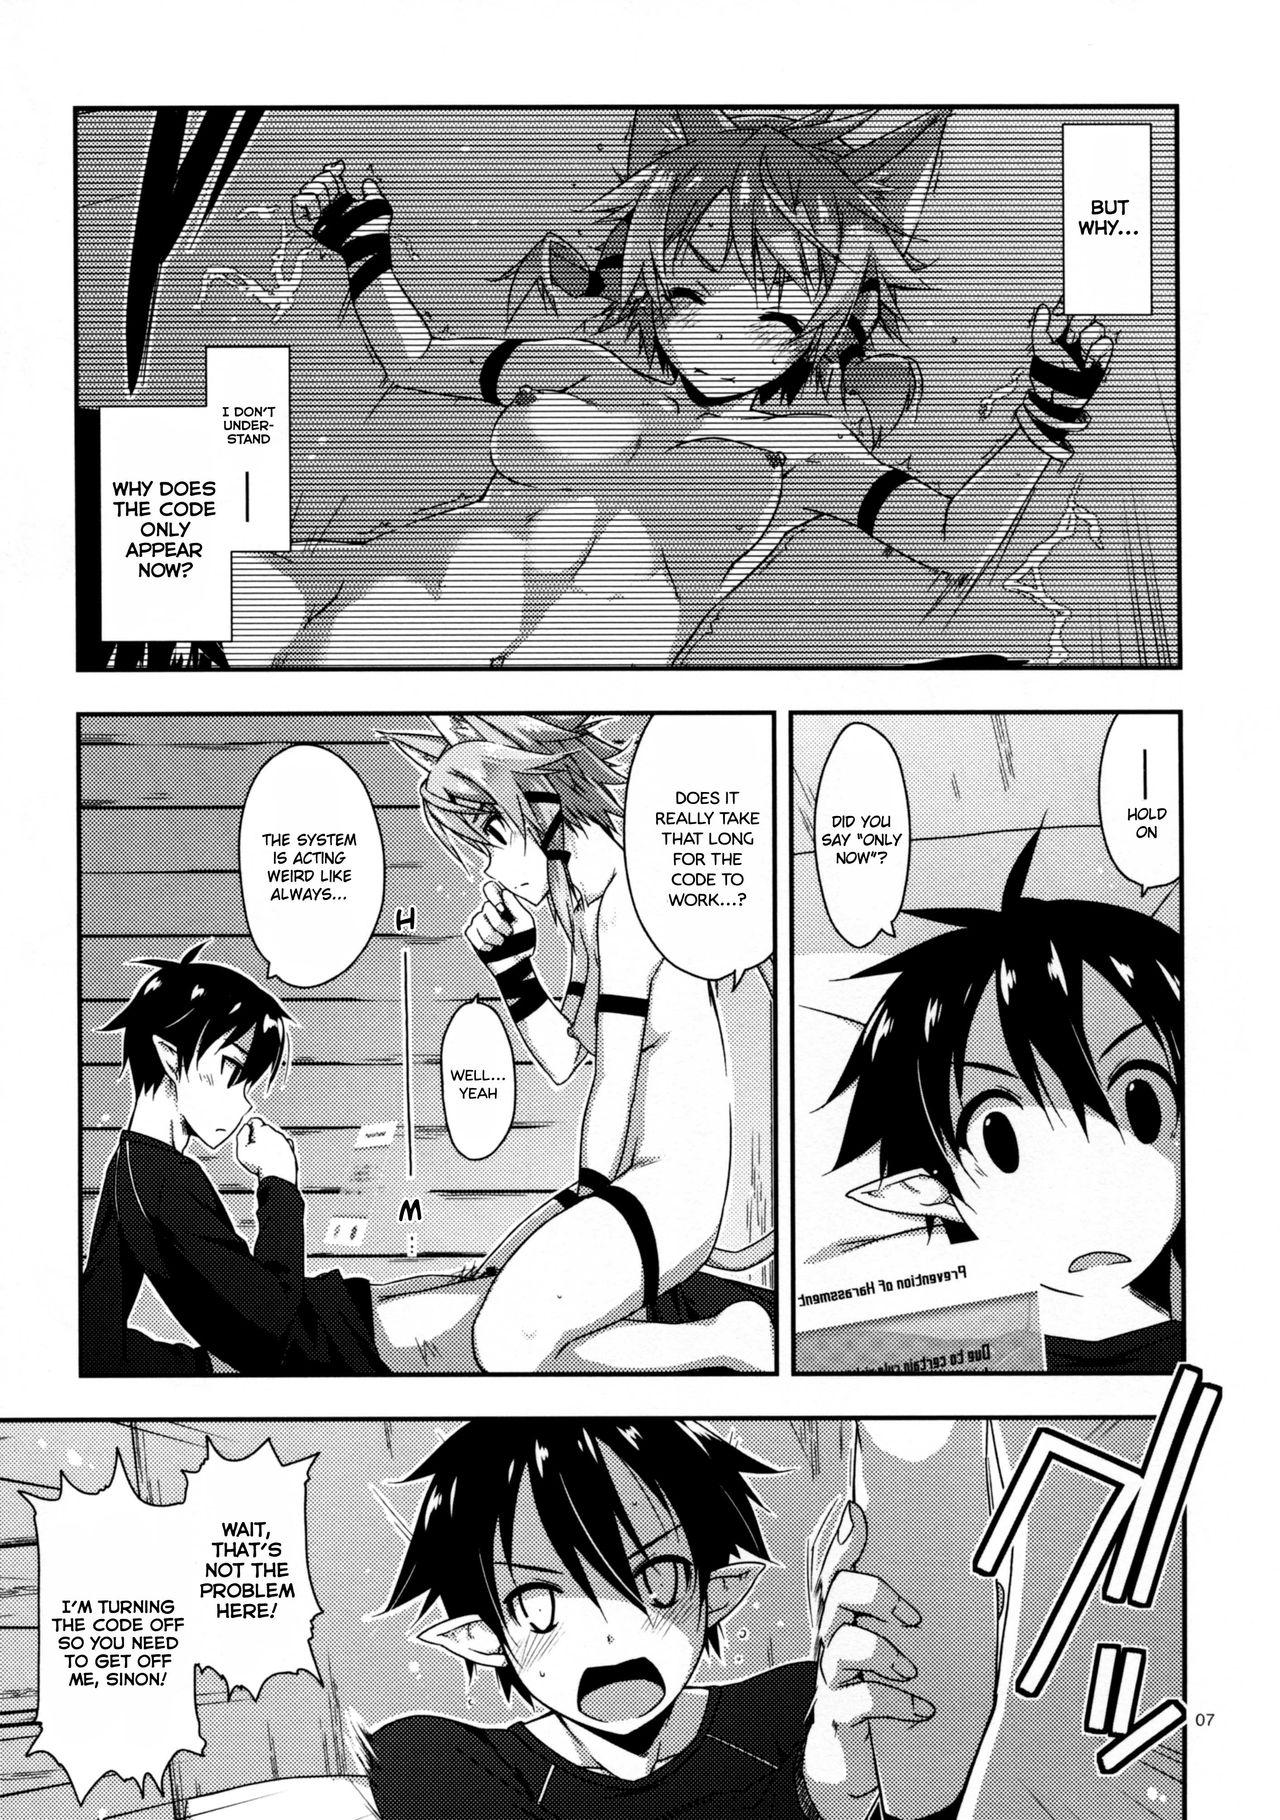 Vecina Case closed. - Sword art online Naked Women Fucking - Page 7